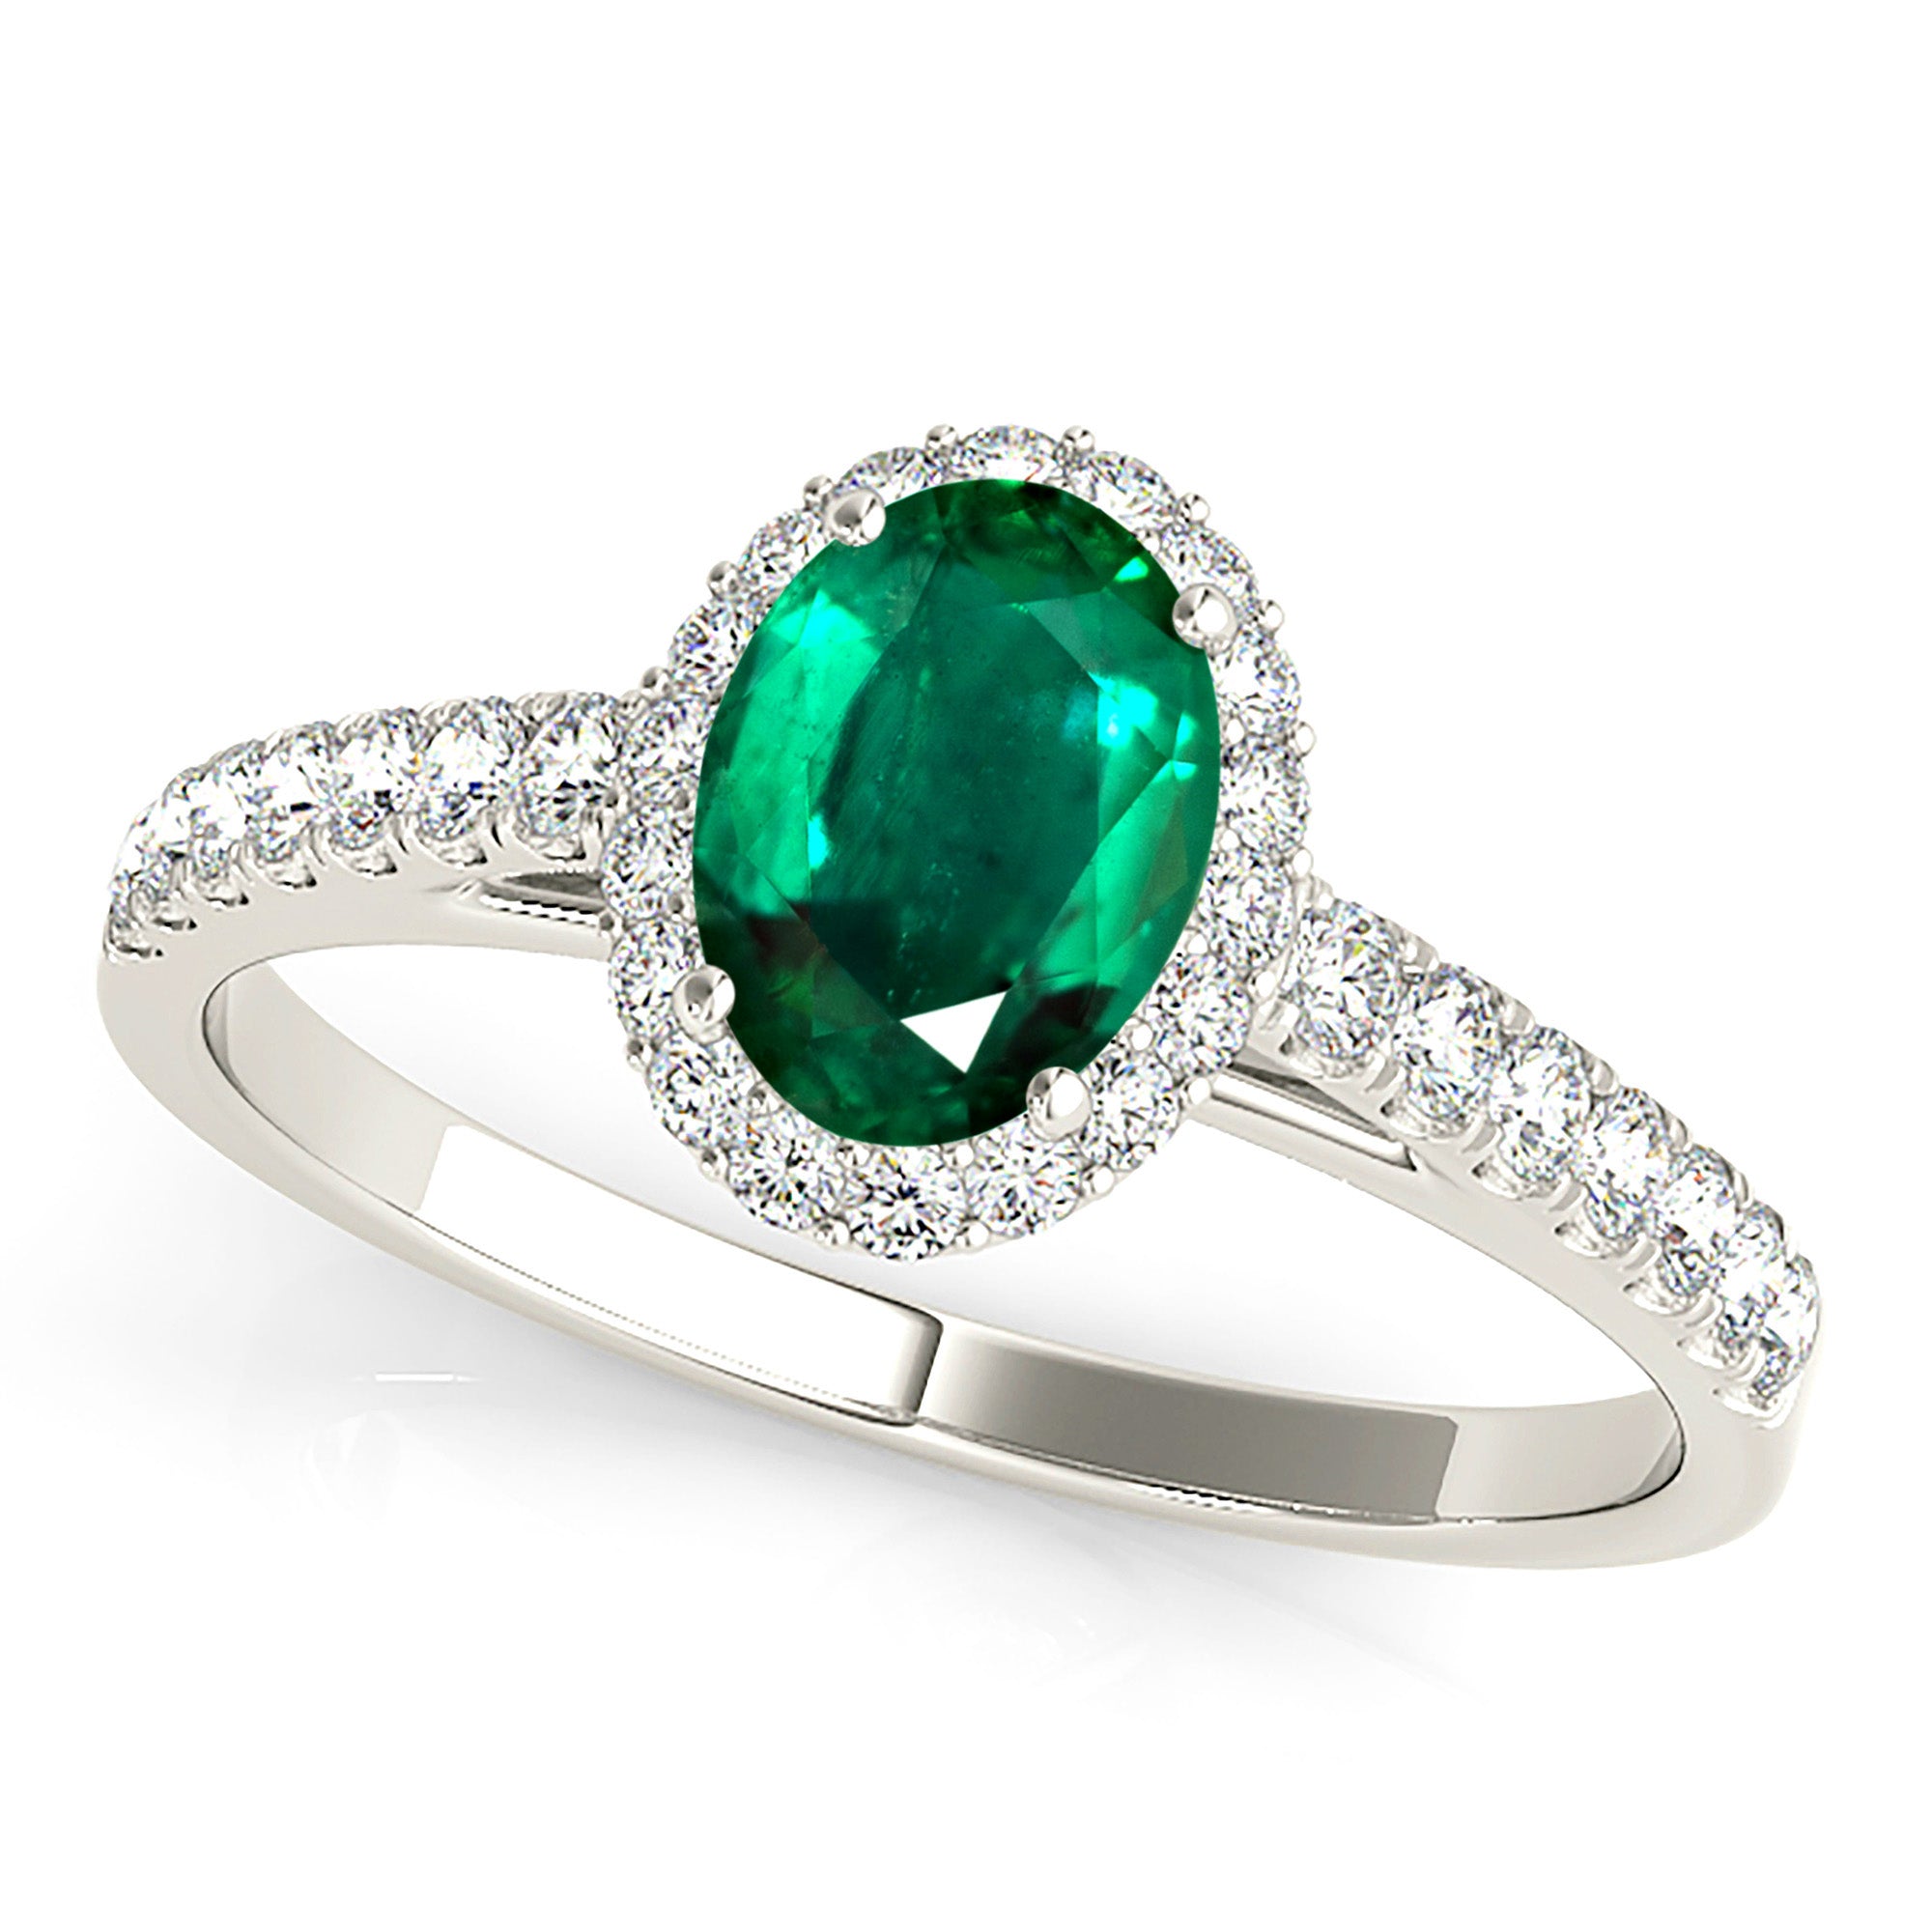 1.30 ct. Genuine Oval Emerald With 0.25 ctw. Diamond Halo And Thin Diamond Band-in 14K/18K White, Yellow, Rose Gold and Platinum - Christmas Jewelry Gift -VIRABYANI